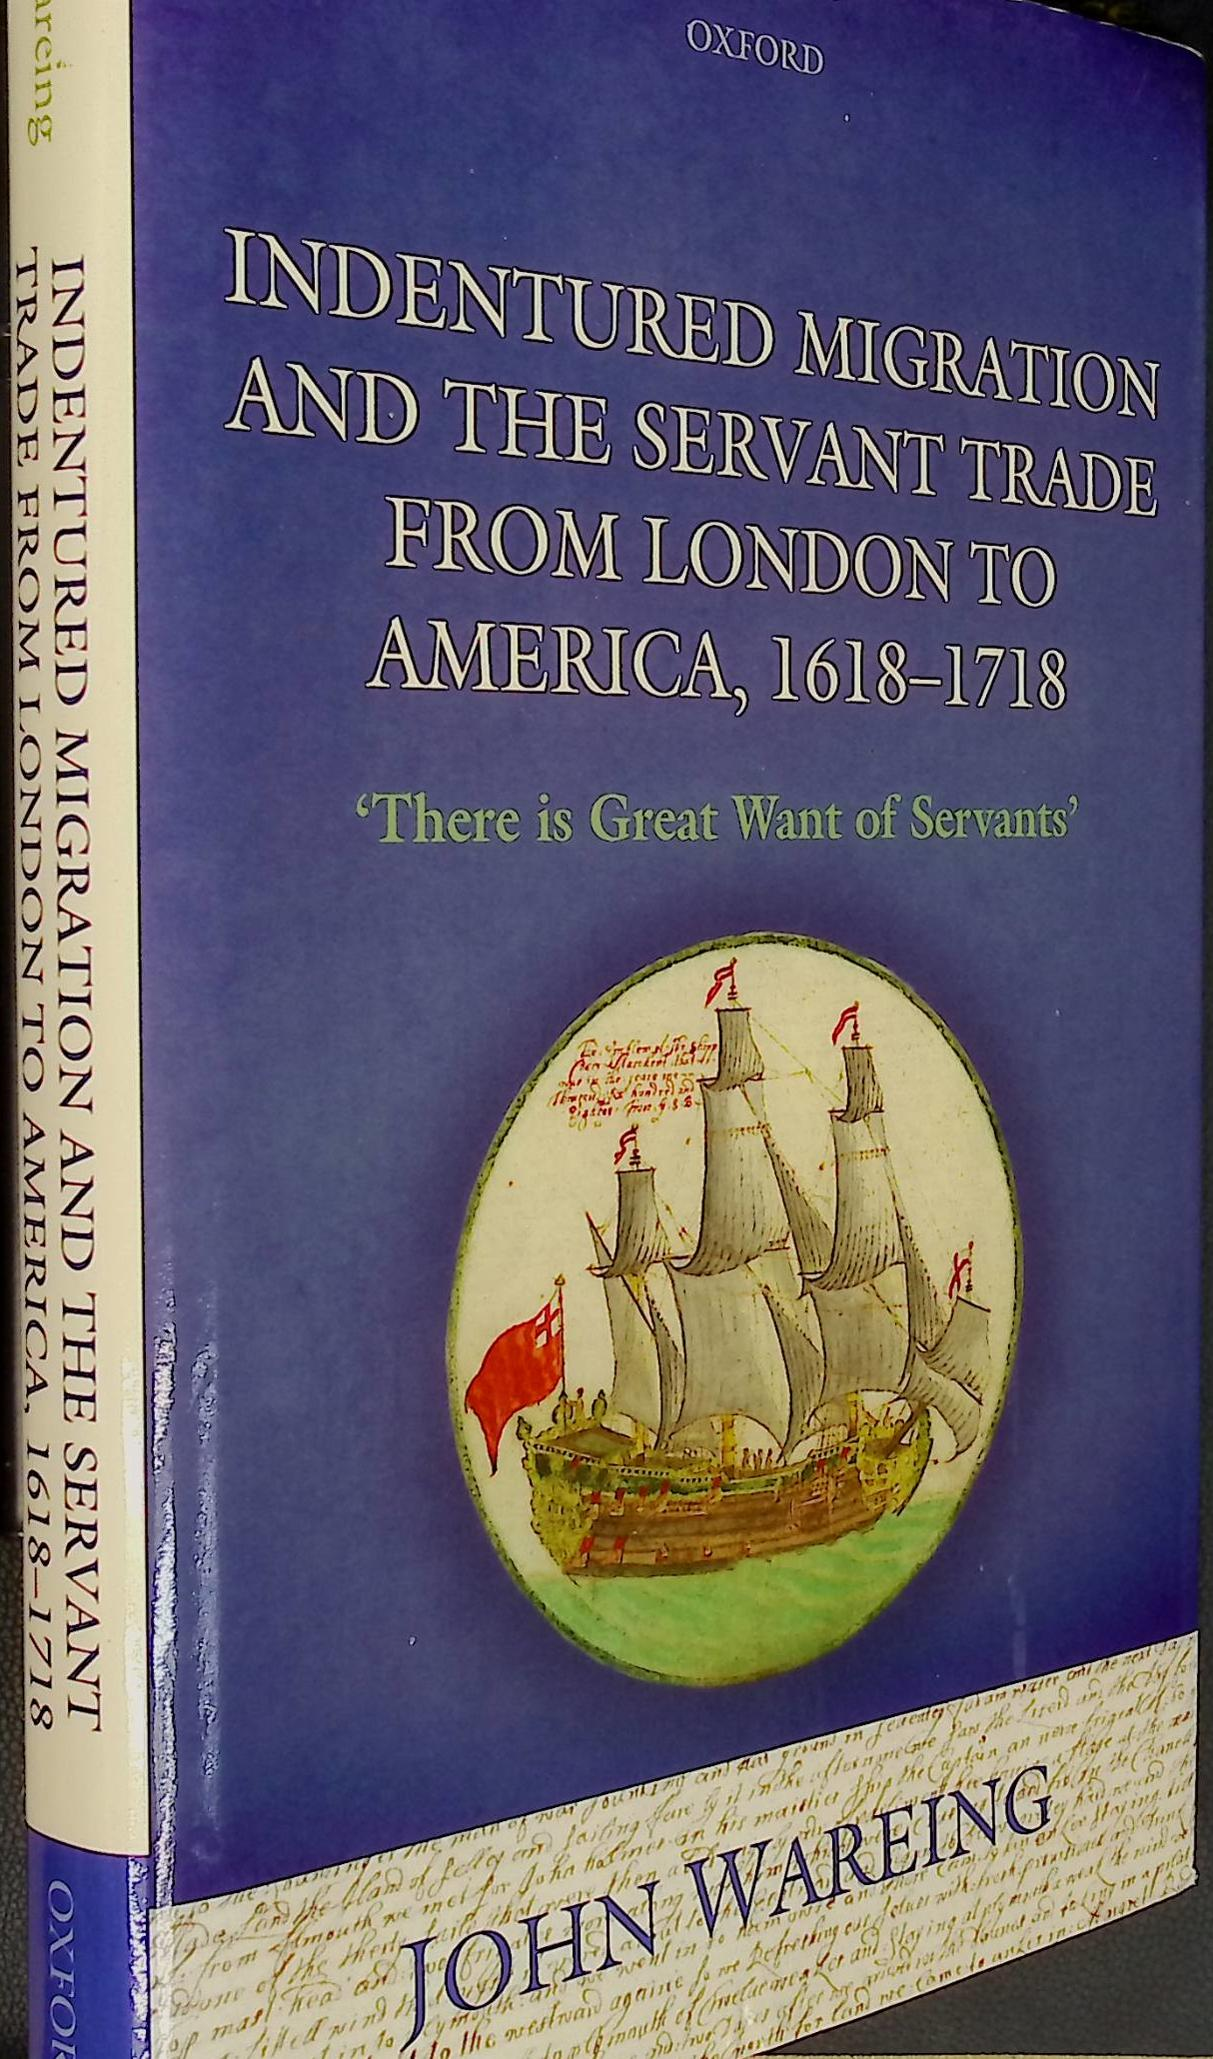 Indentured Migration and the Servant Trade from London to America 1618-1718. 'There is Great Want of Servants'.